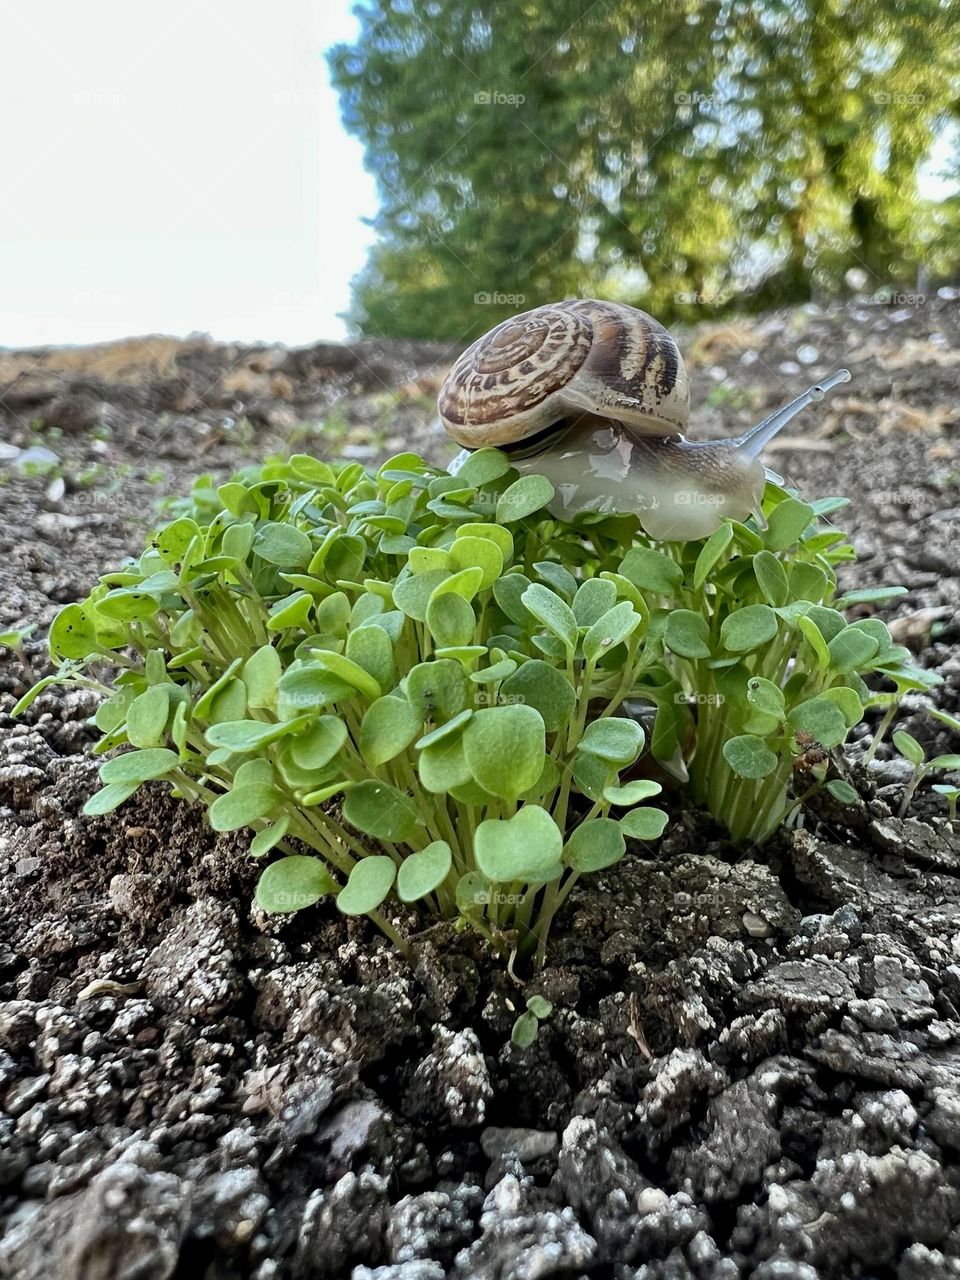 Plants and snail seen from the ground up